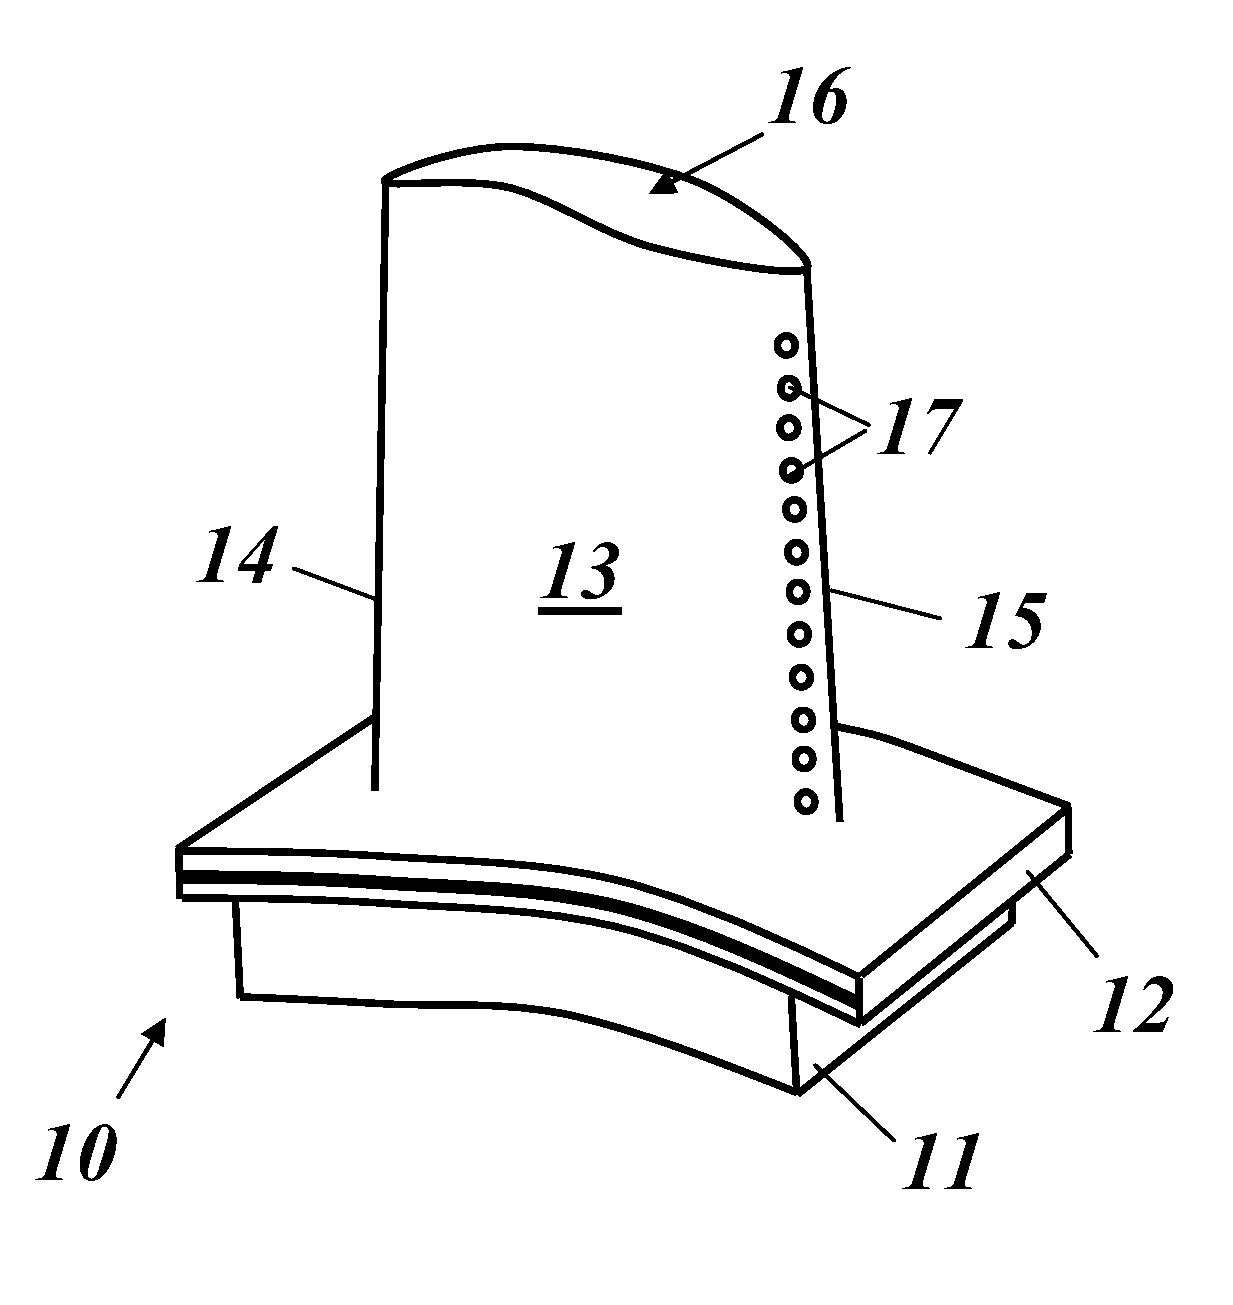 Method for repairing and/or upgrading a component of a gas turbine